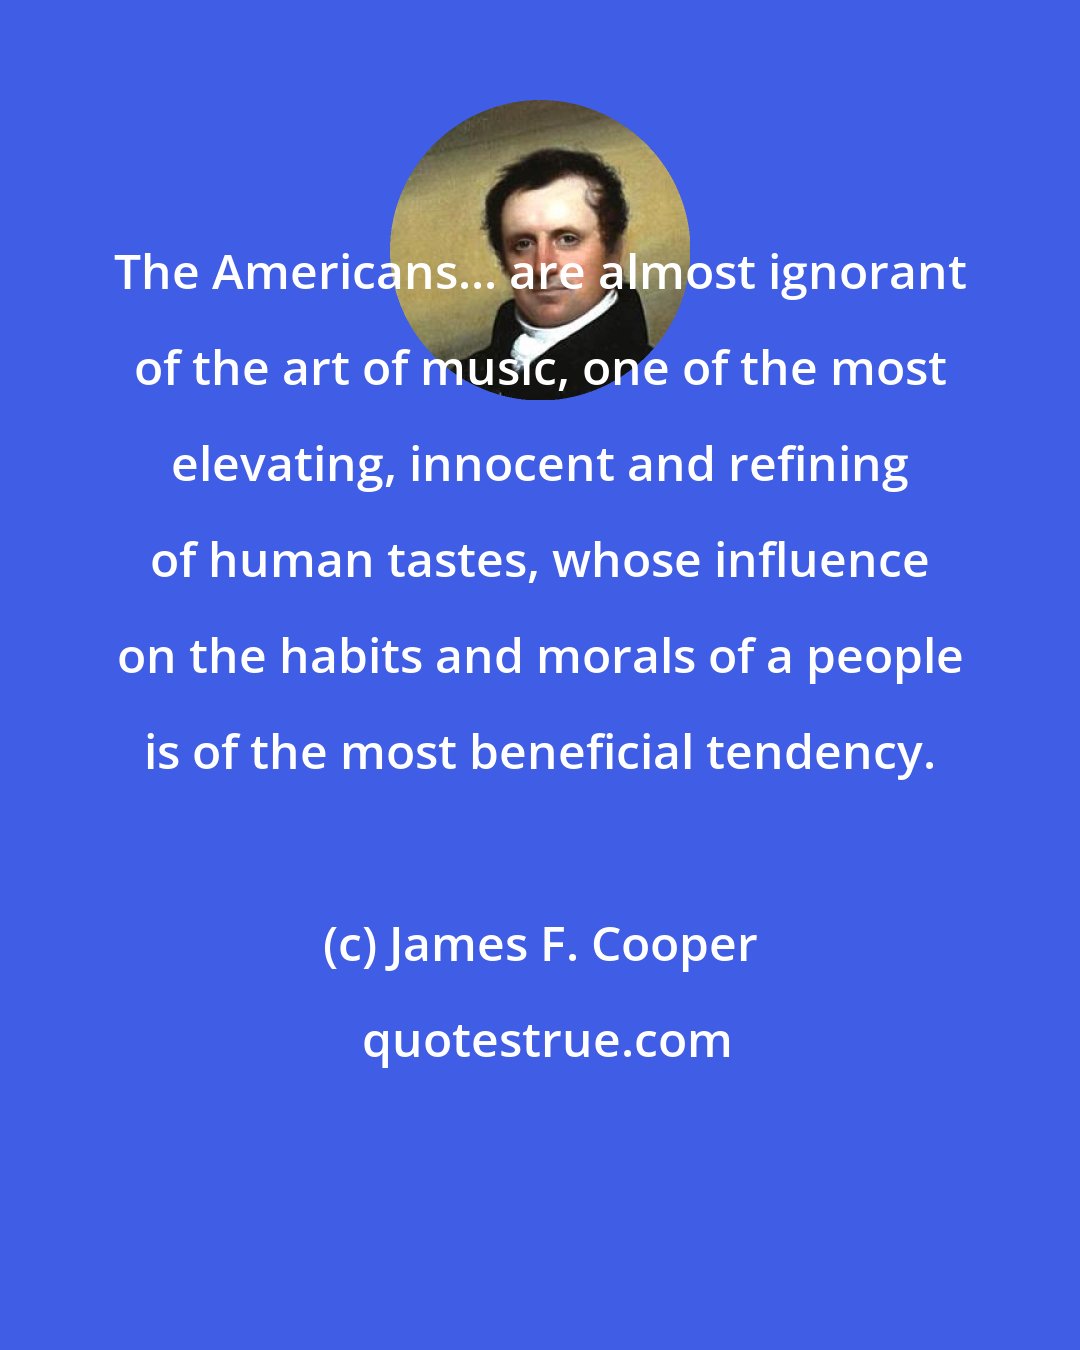 James F. Cooper: The Americans... are almost ignorant of the art of music, one of the most elevating, innocent and refining of human tastes, whose influence on the habits and morals of a people is of the most beneficial tendency.